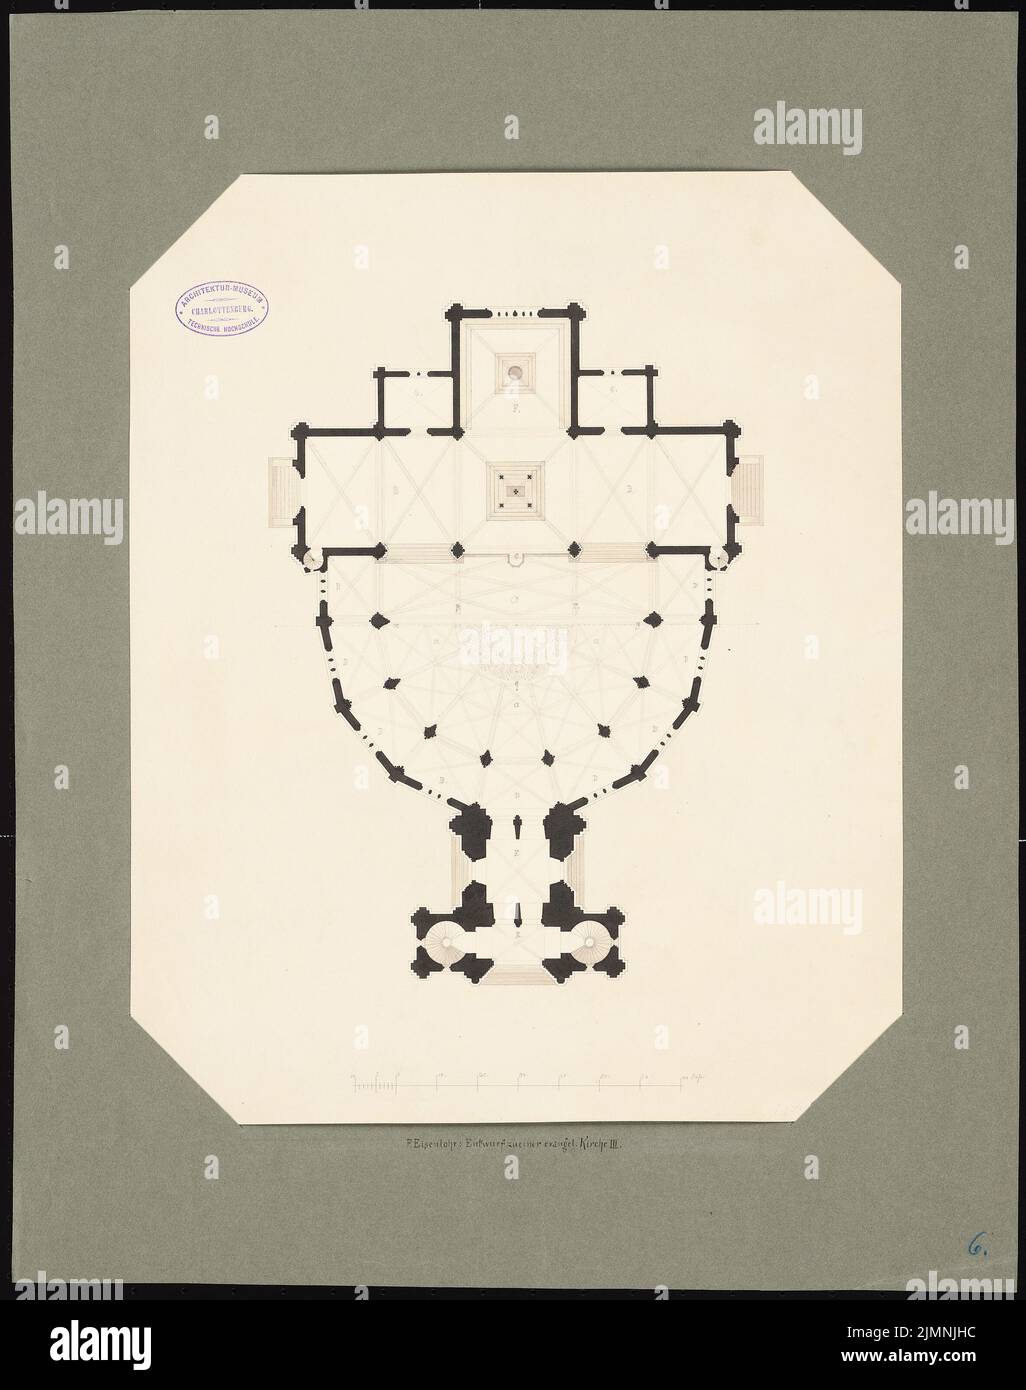 Eisenlohr Friedrich (1805-1855), Evangelical Church (without dat.): 3rd draft: floor plan with a vaulted criminal crime II. Tusche, pencil watercolored on paper, 62.9 x 49.7 cm (incl. Scan edges) Stock Photo